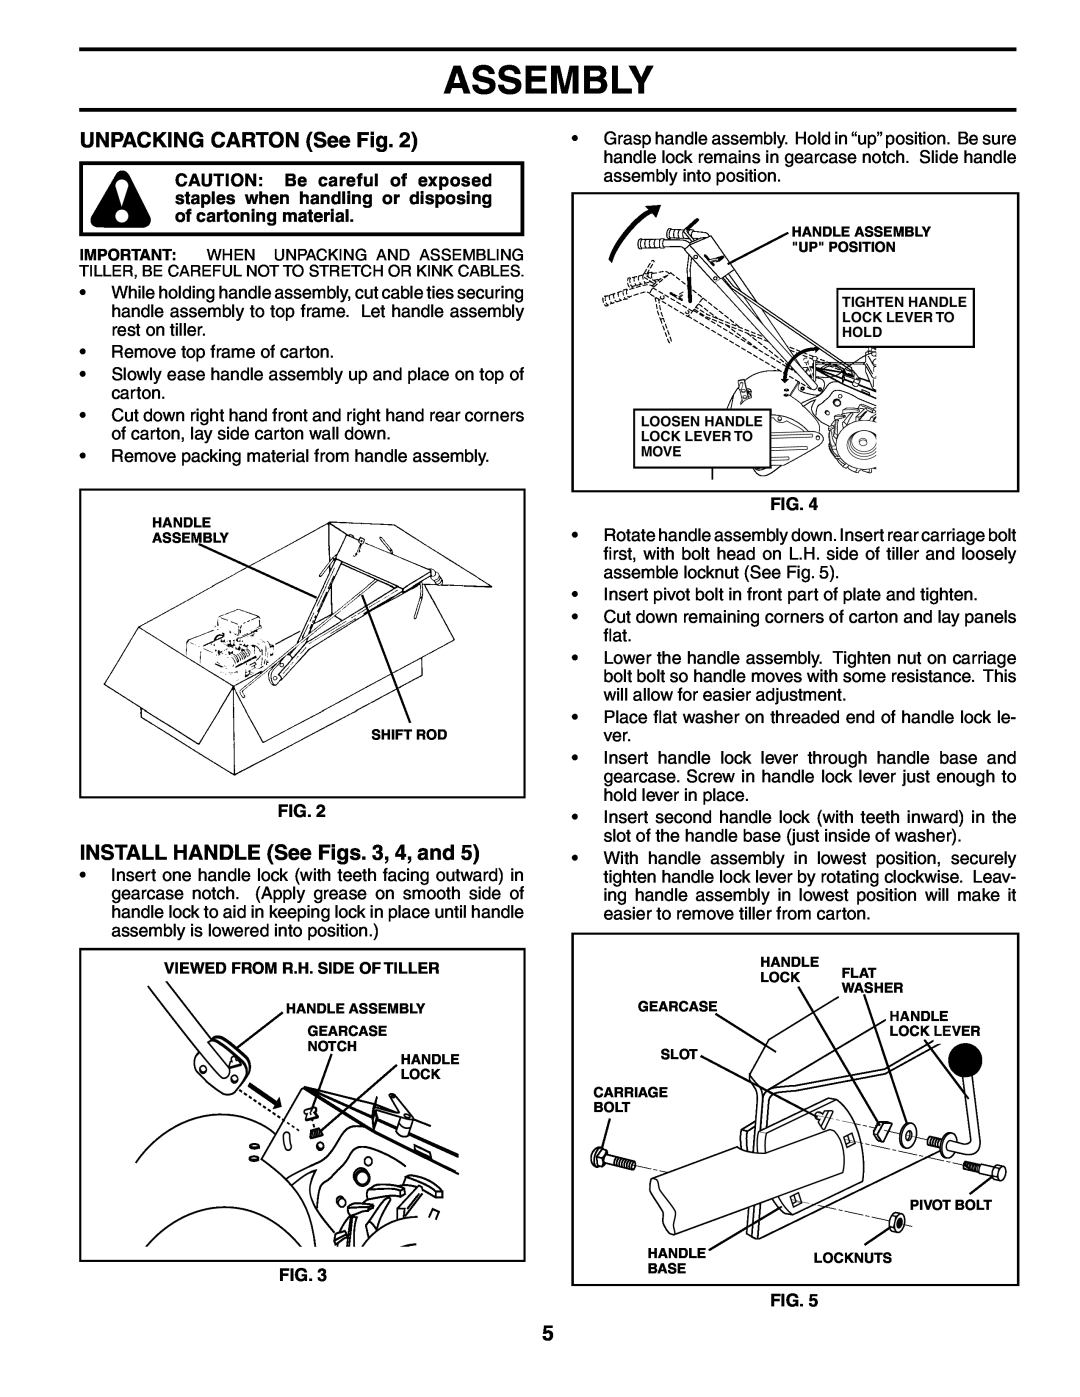 Weed Eater 186100 owner manual UNPACKING CARTON See Fig, INSTALL HANDLE See Figs. 3, 4, and, Assembly 